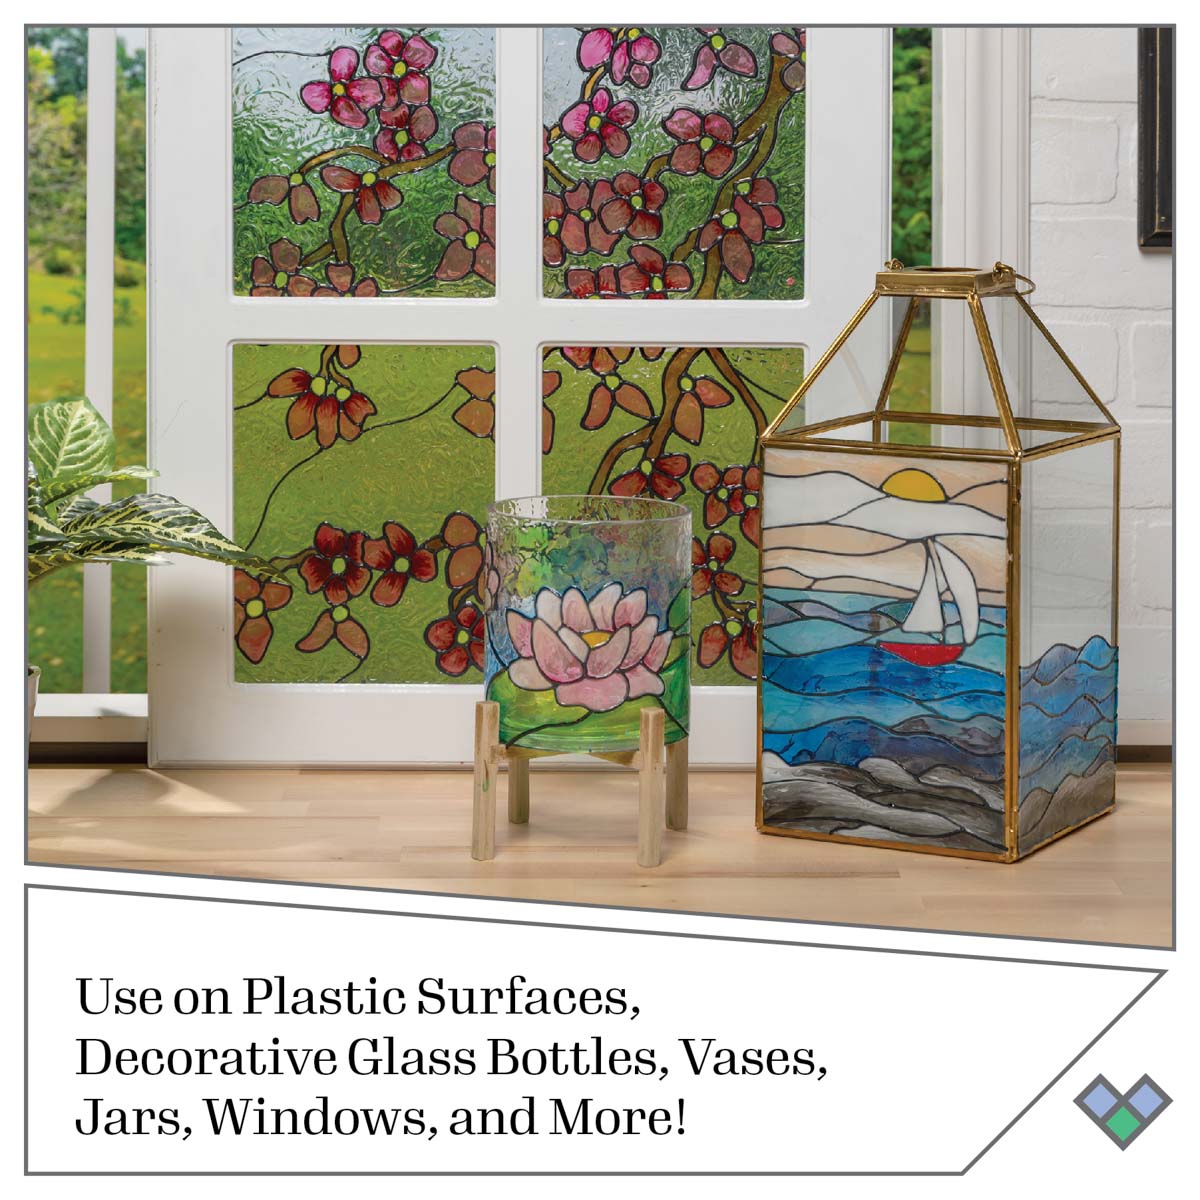 Gallery Glass 2023 Product Catalog by plaidcrafts - Issuu